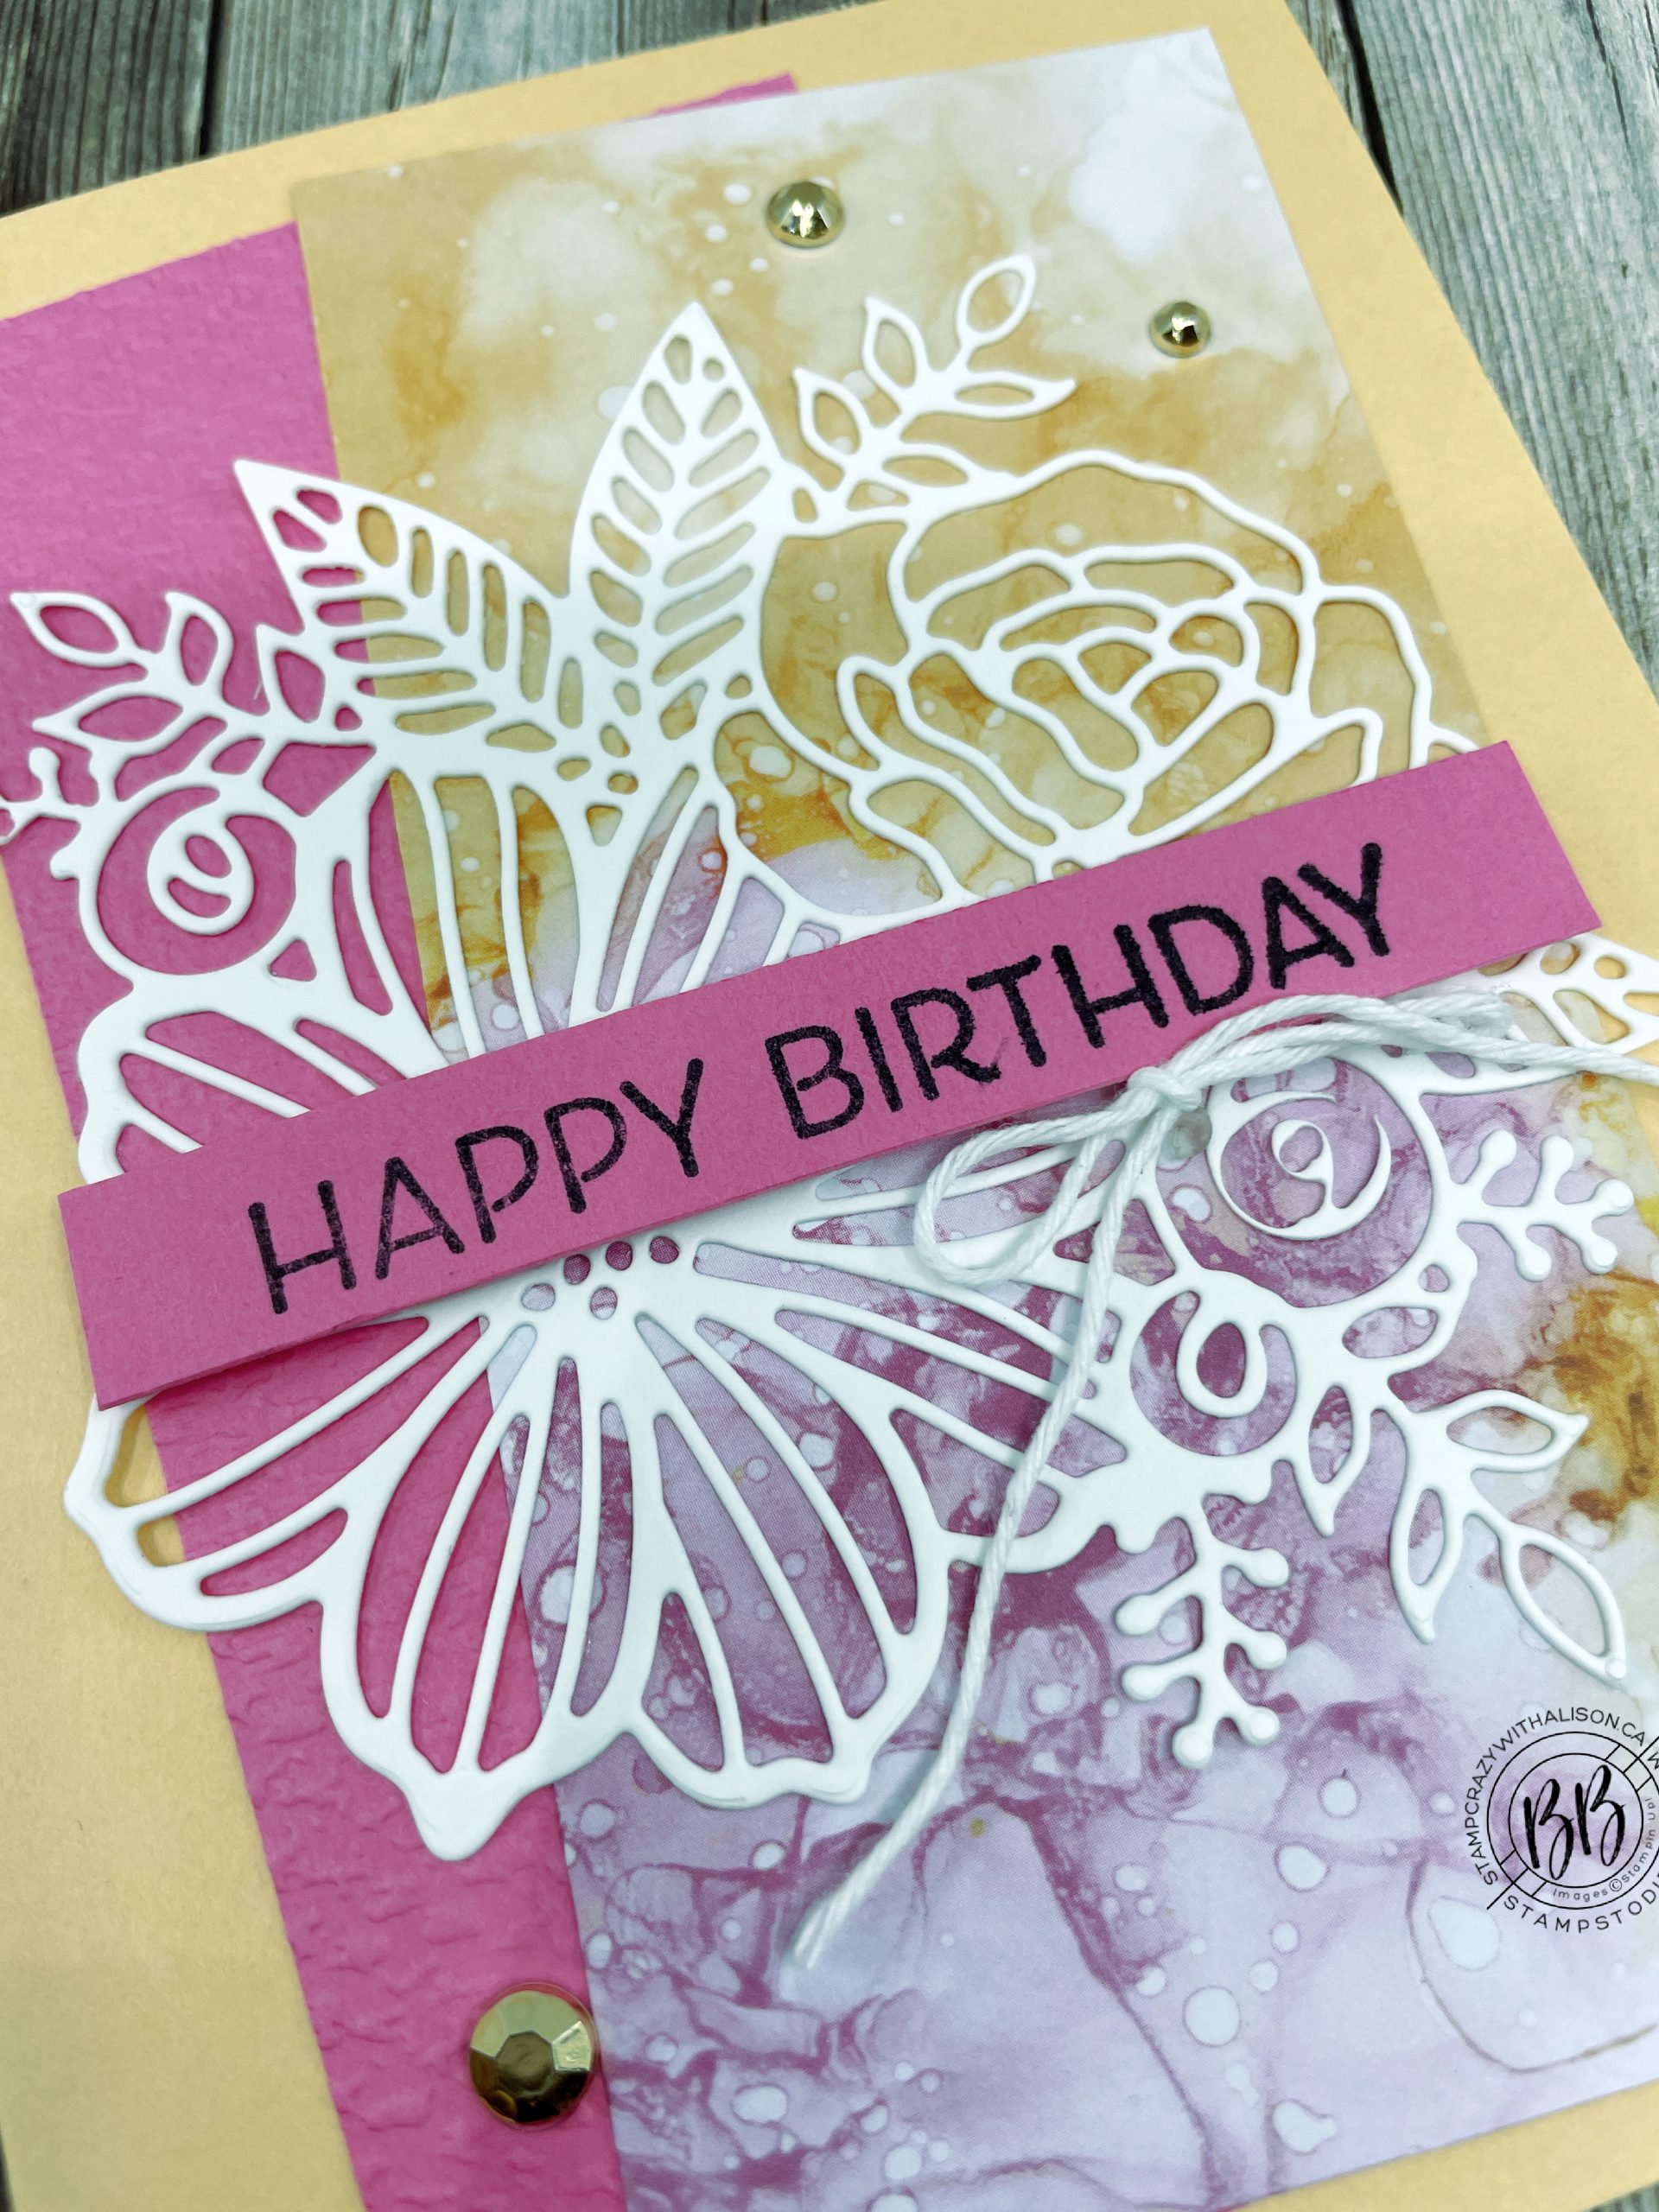 Just in CASE with Artistically Inked Bundle from Stampin’ Up!®